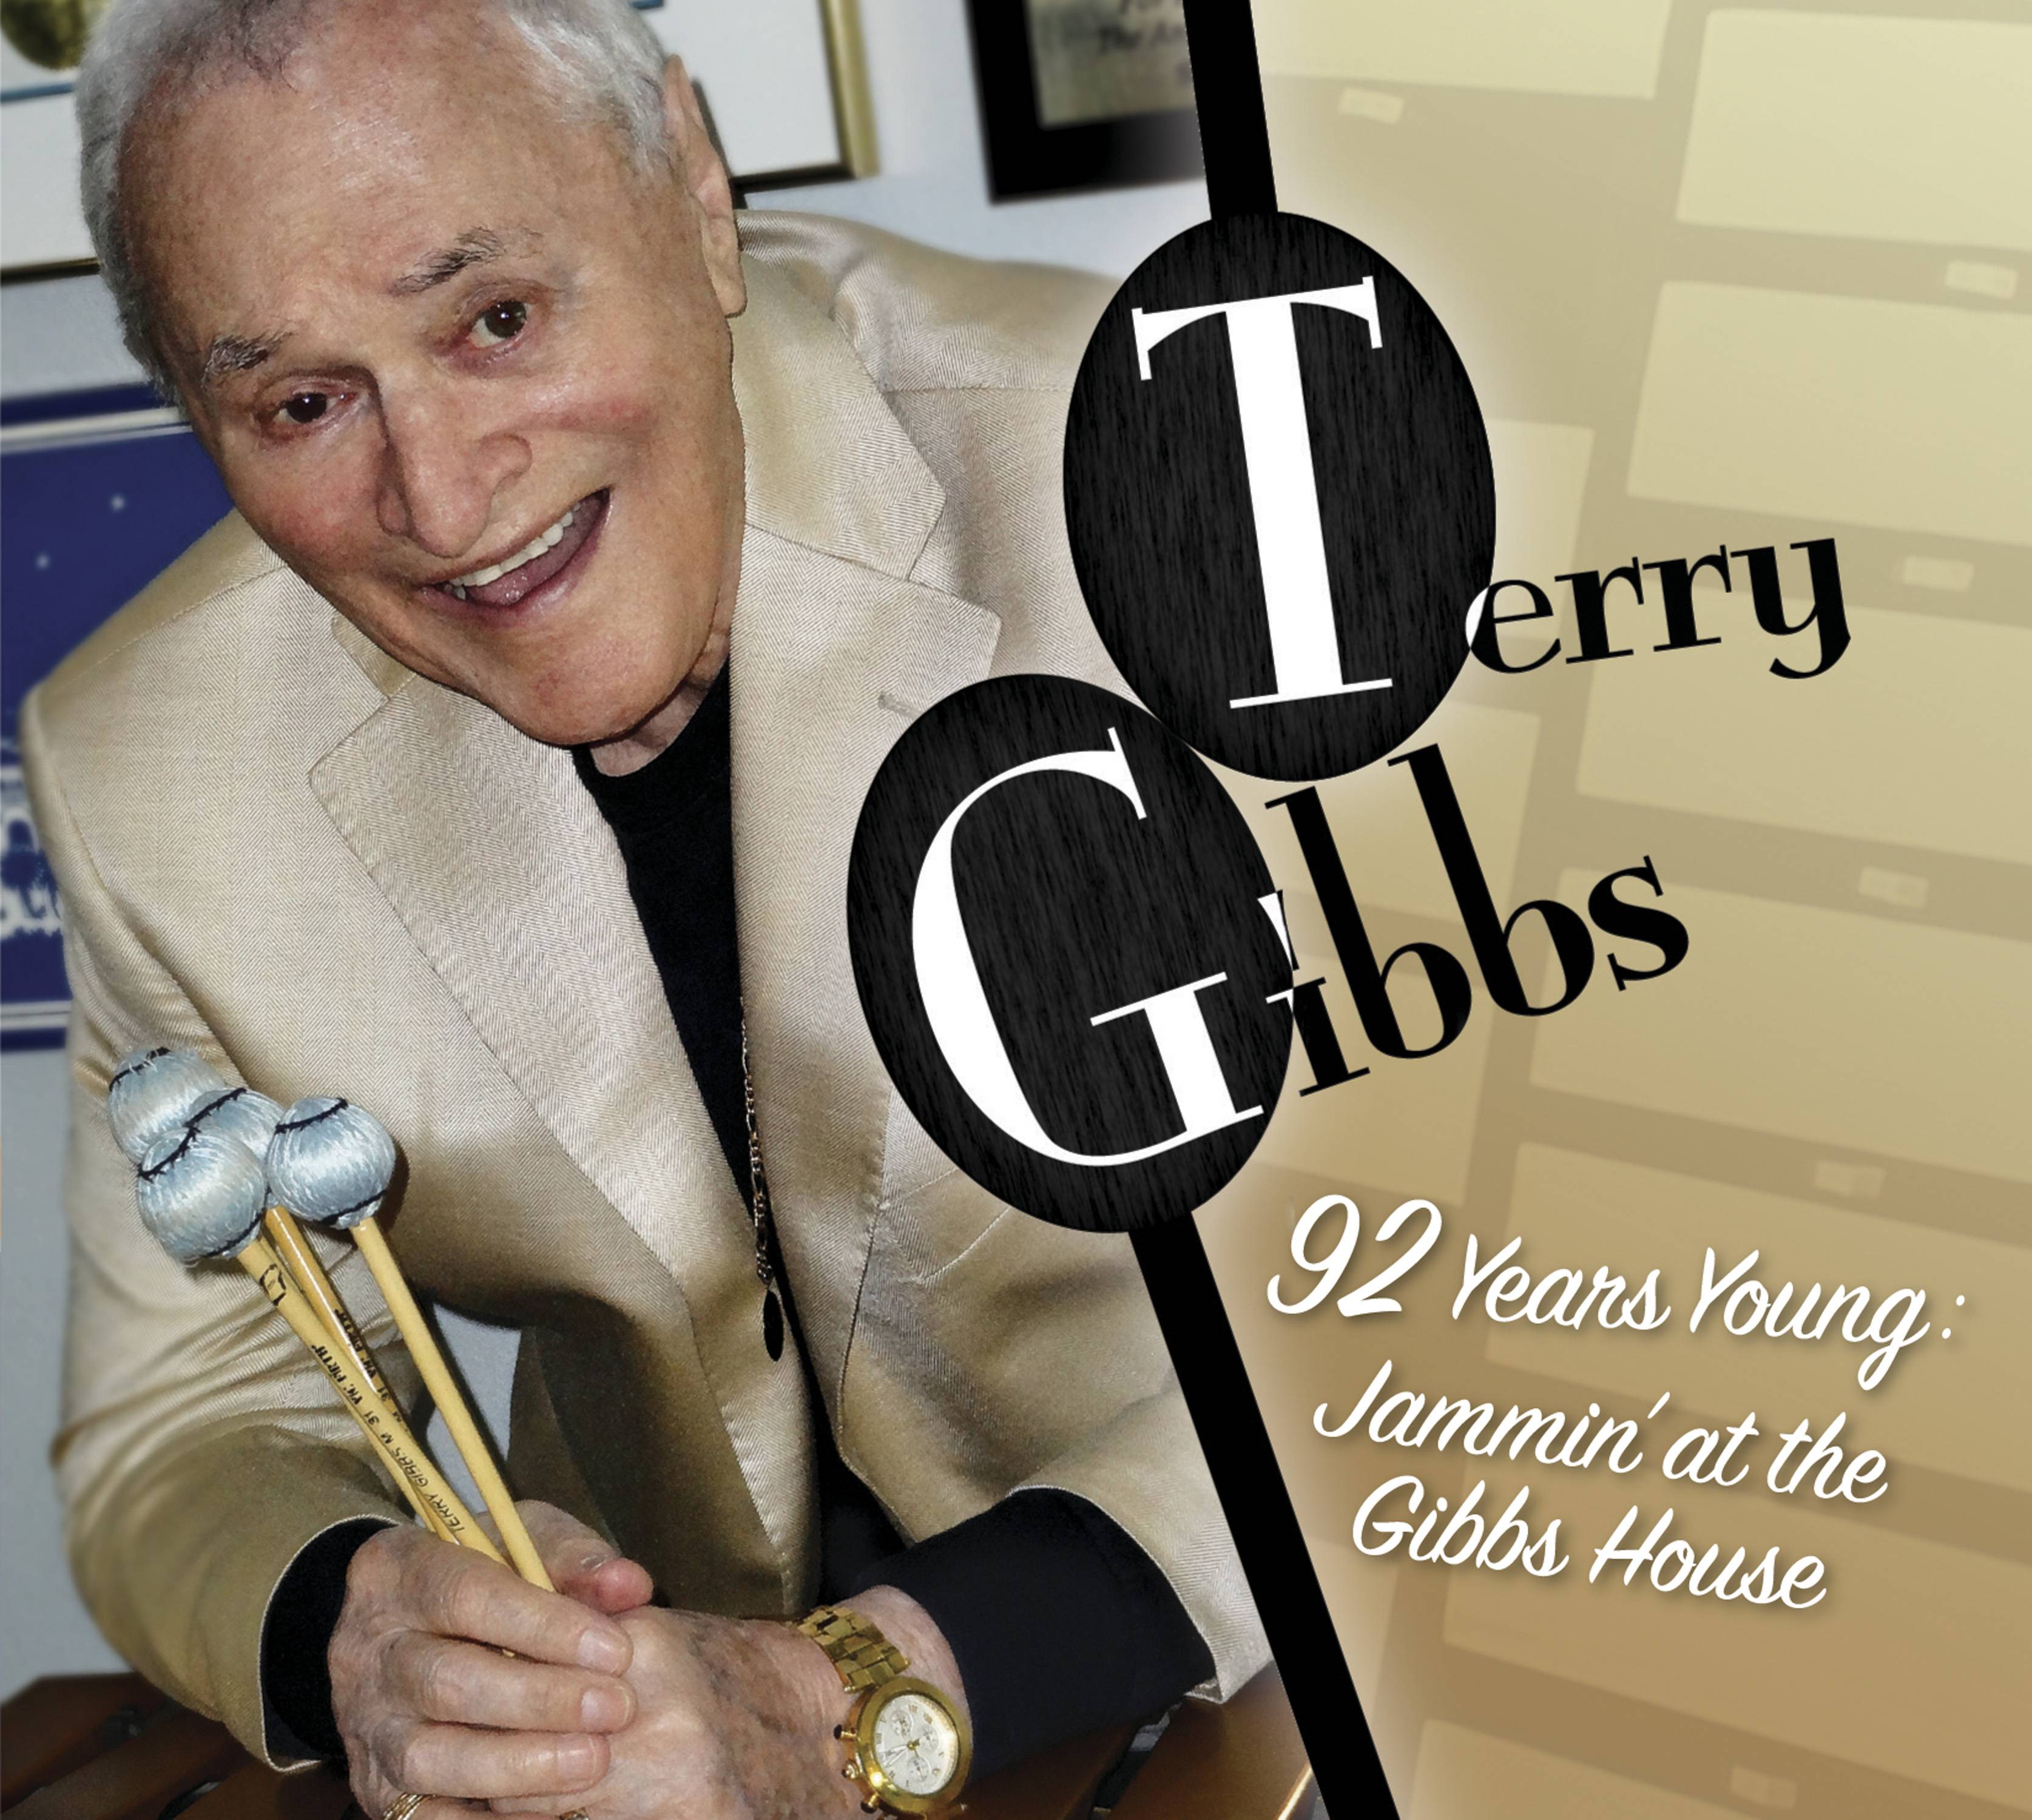 Terry Gibbs – 92 Years Young (2017) [HDTracks FLAC 24bit/44,1kHz]